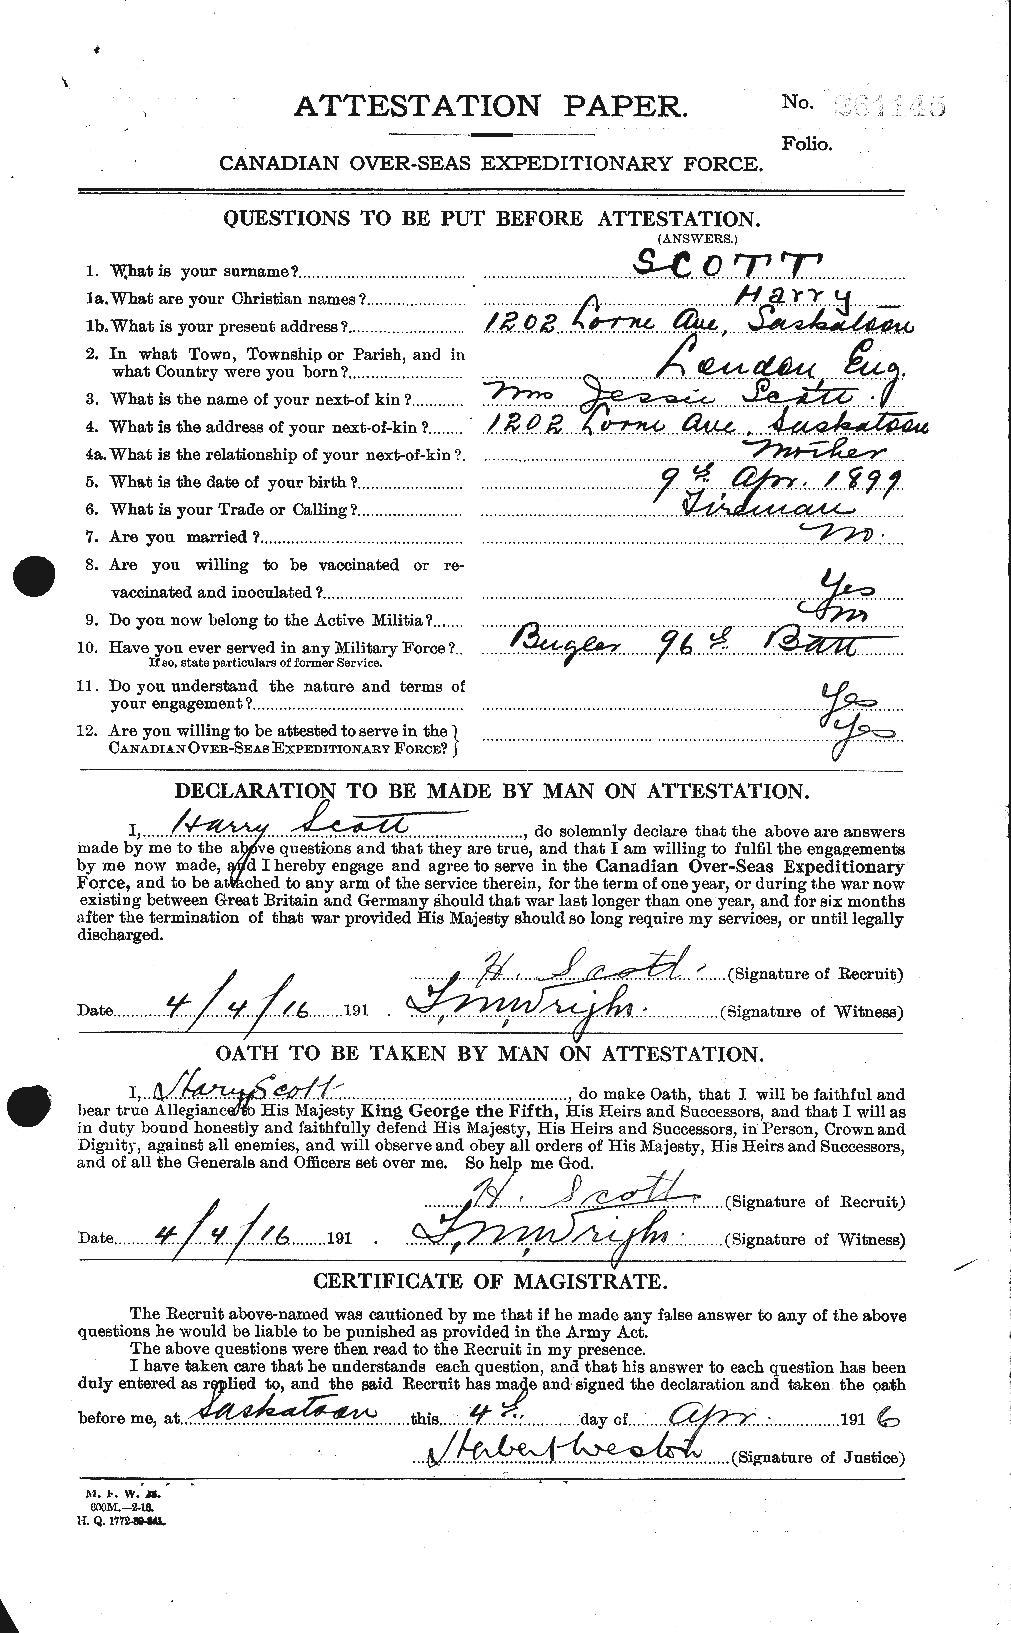 Personnel Records of the First World War - CEF 086330a